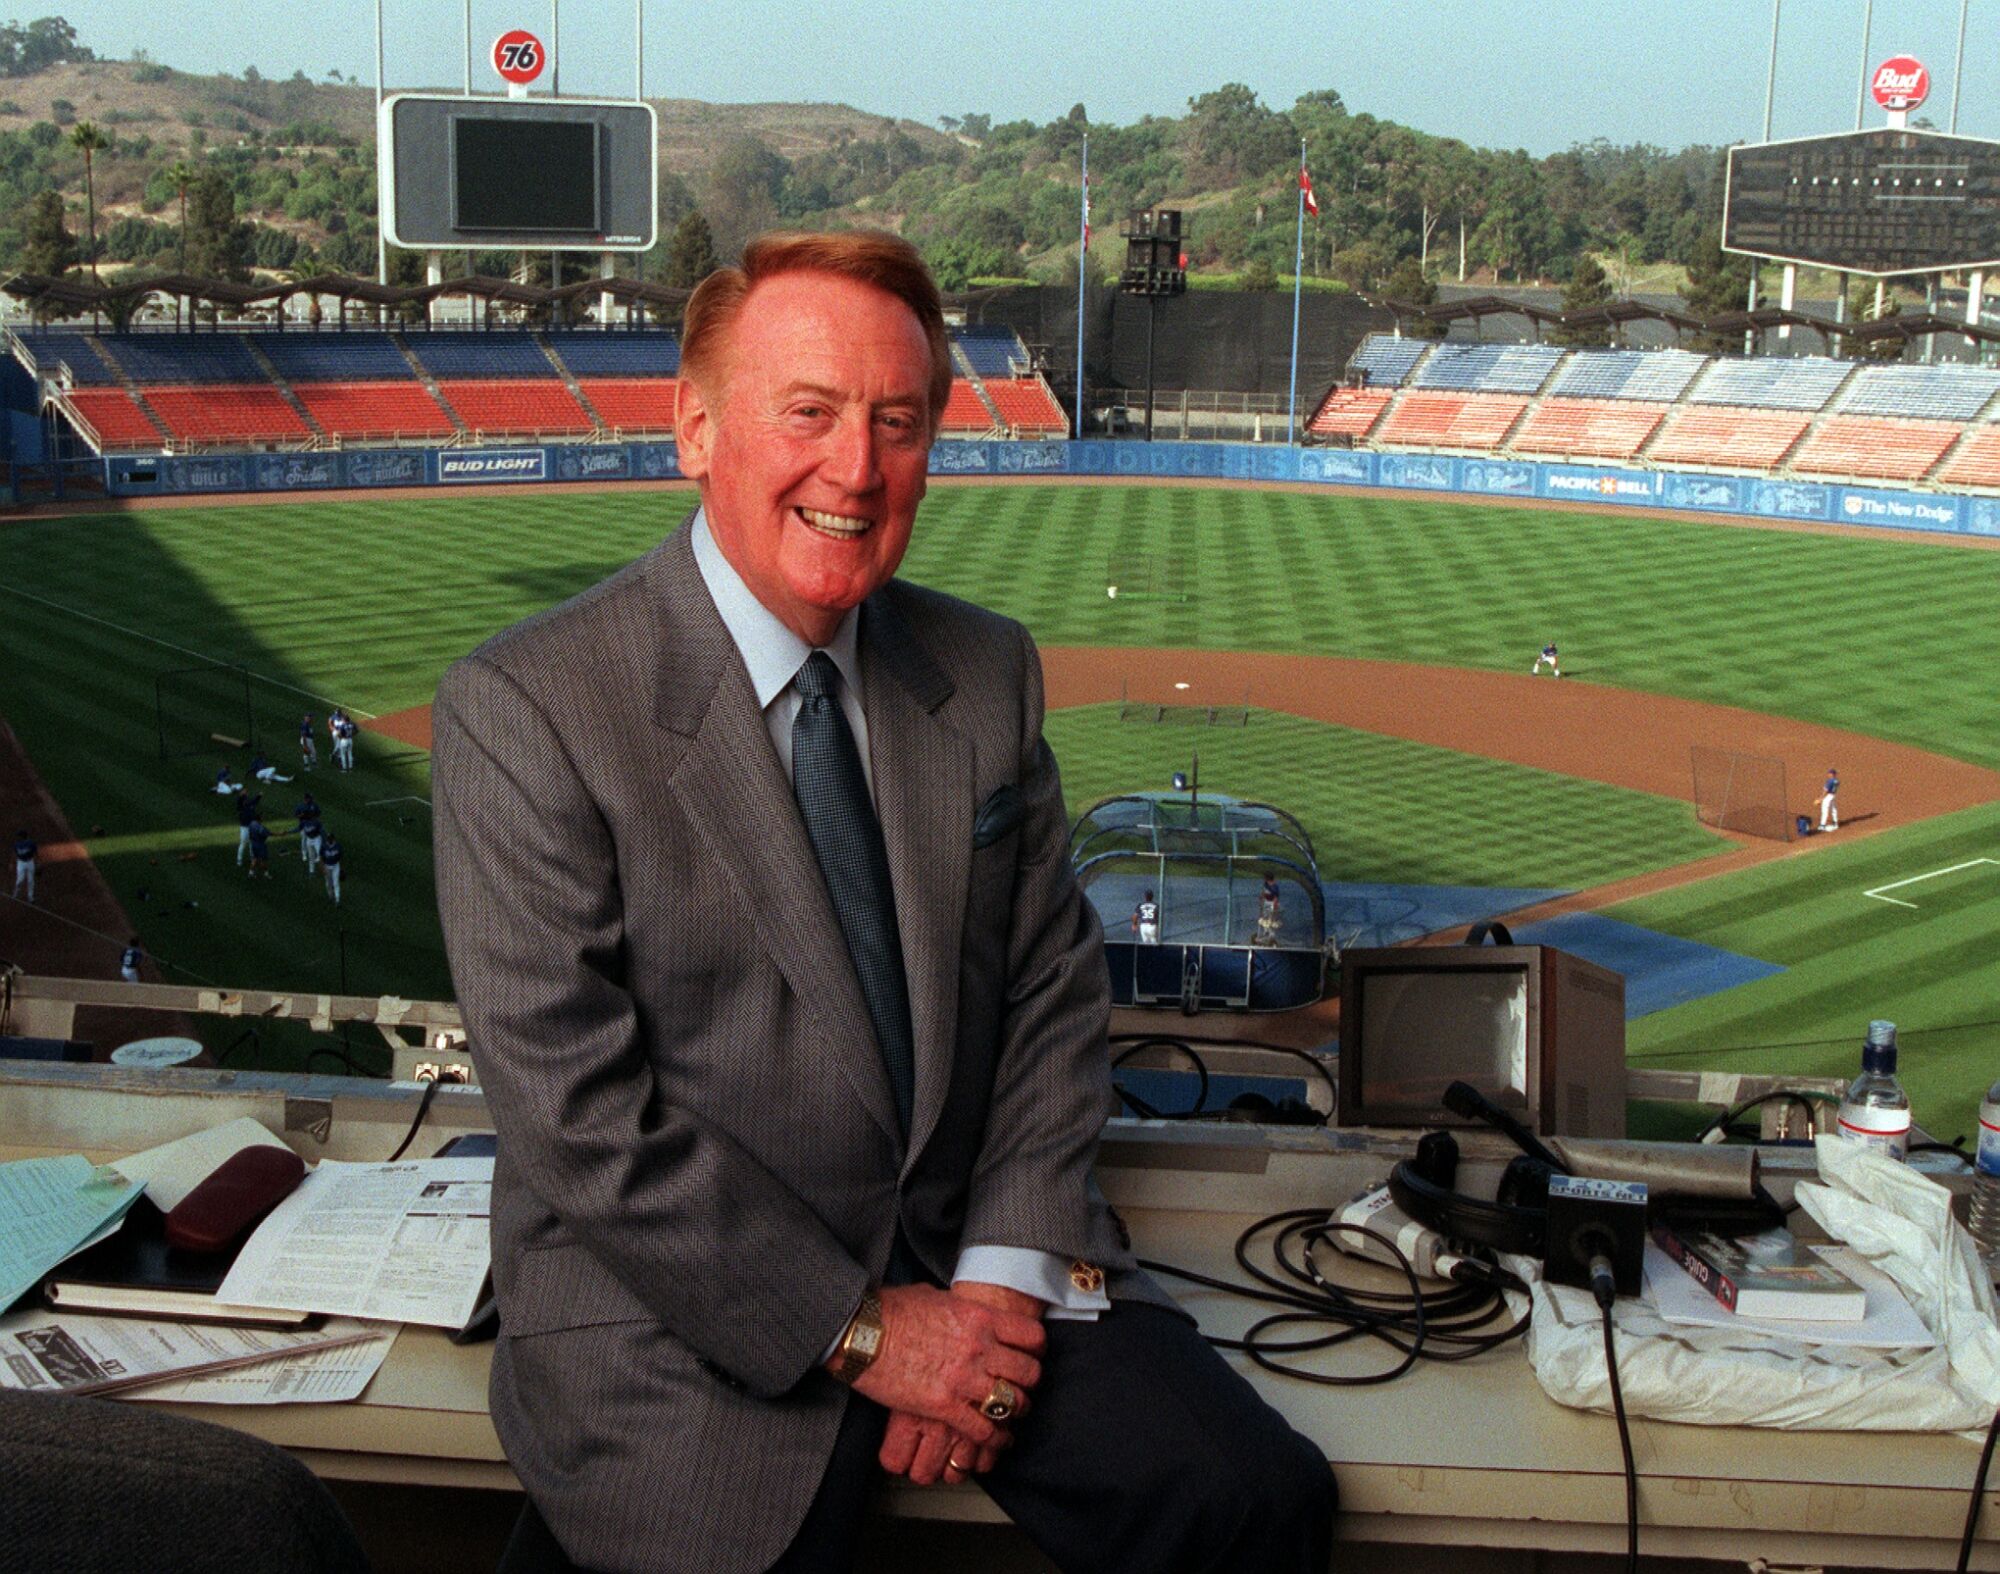 CA.Scully.1.0915.BC.6 –– Dodger announcer Vin Scully sits in broadcasting booth at Dodger Stadium.